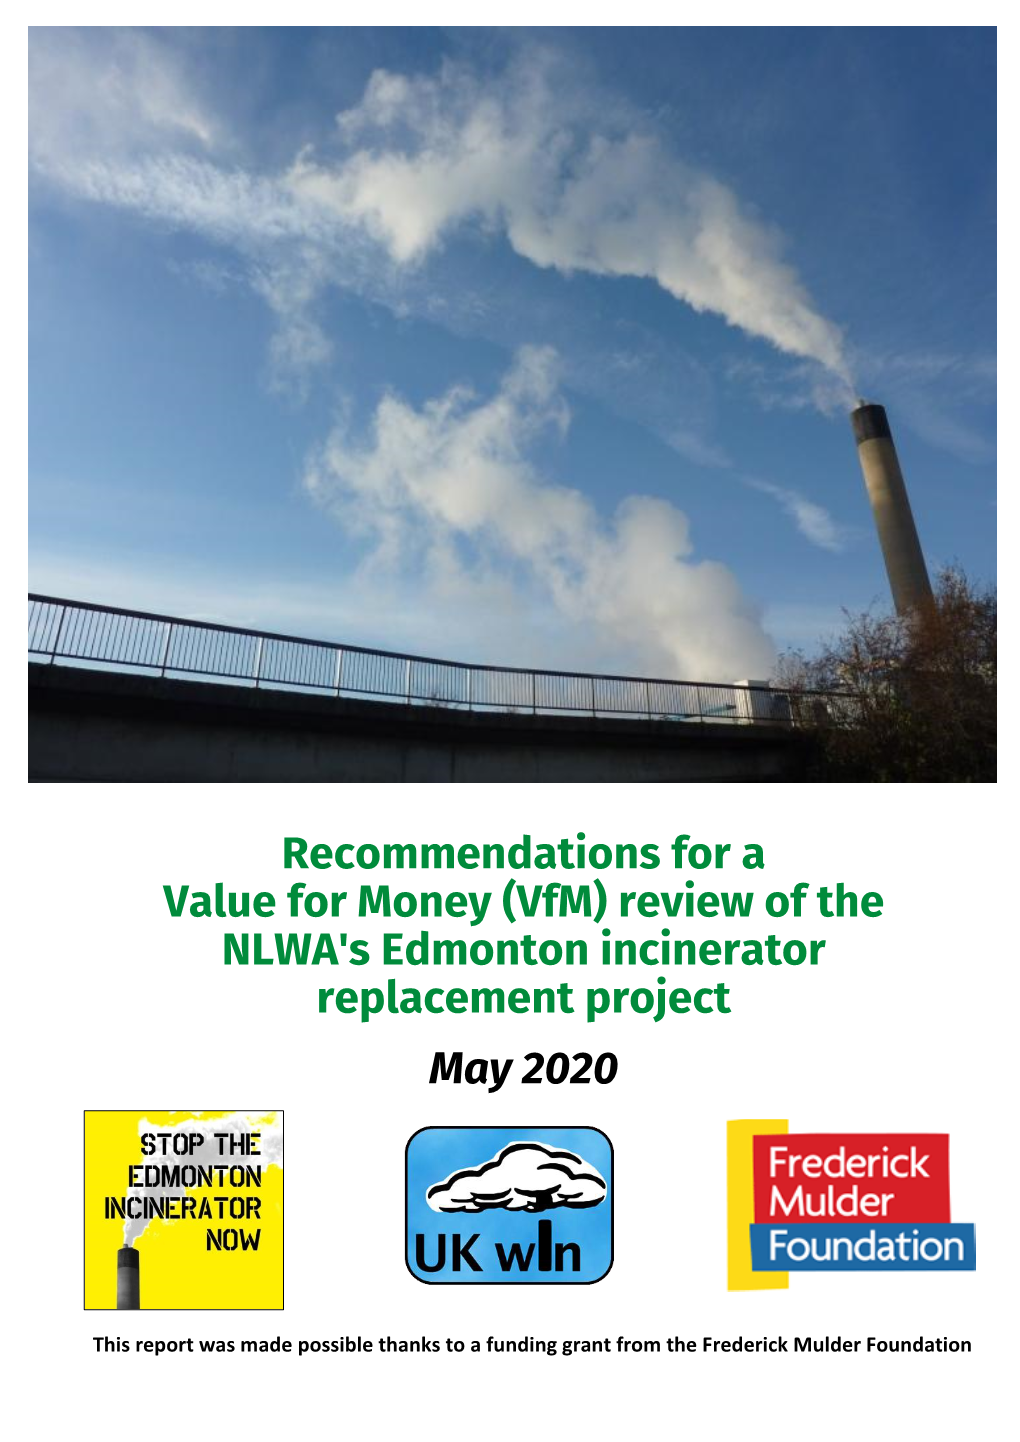 Recommendations for a Value for Money (Vfm) Review of the NLWA's Edmonton Incinerator Replacement Project